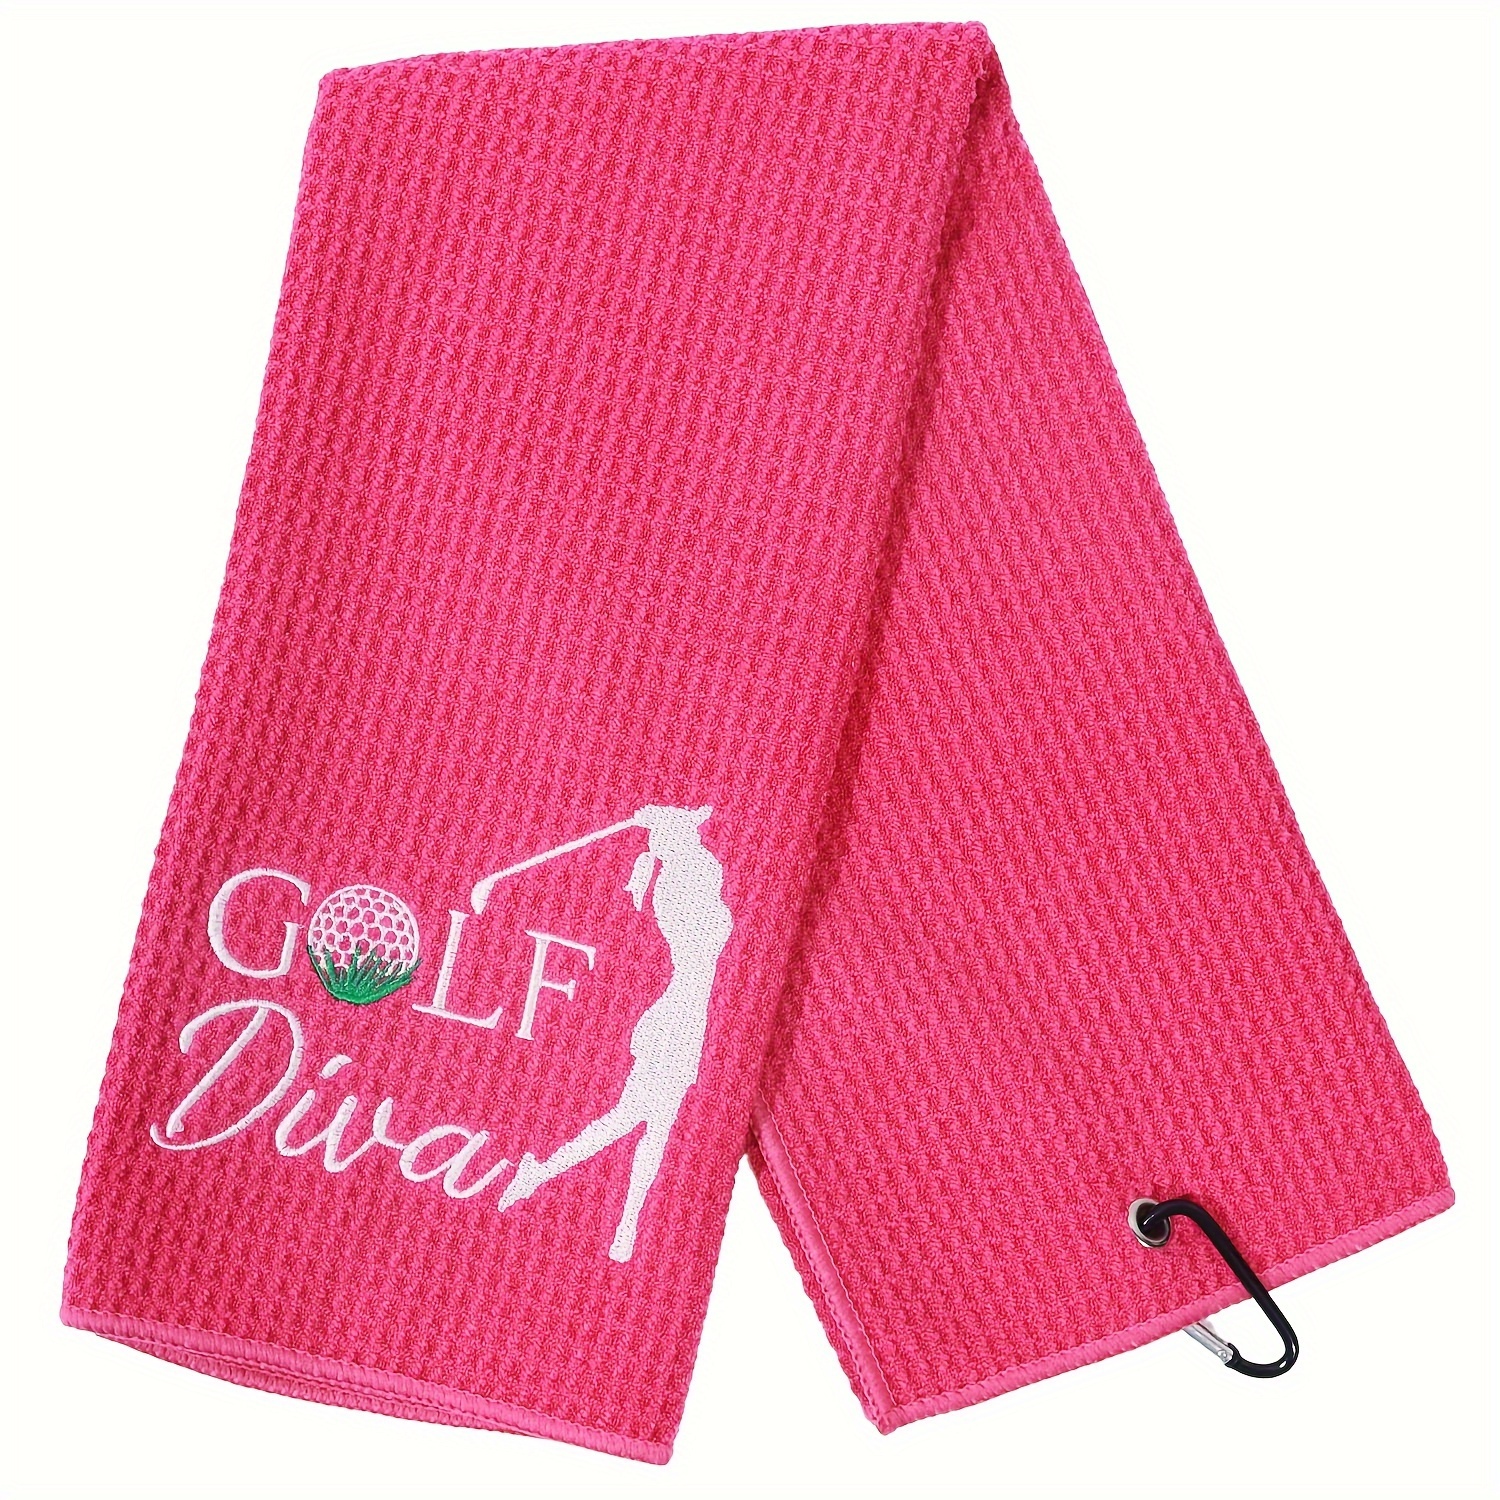 

1pc Funny Golf Towel For Women, Ladies Embroidered Pink Golf Towel For Golf Bags With Clip, Women Golf Accessories, Birthday Gift For Mother, Women, Golfer, Golf Fan